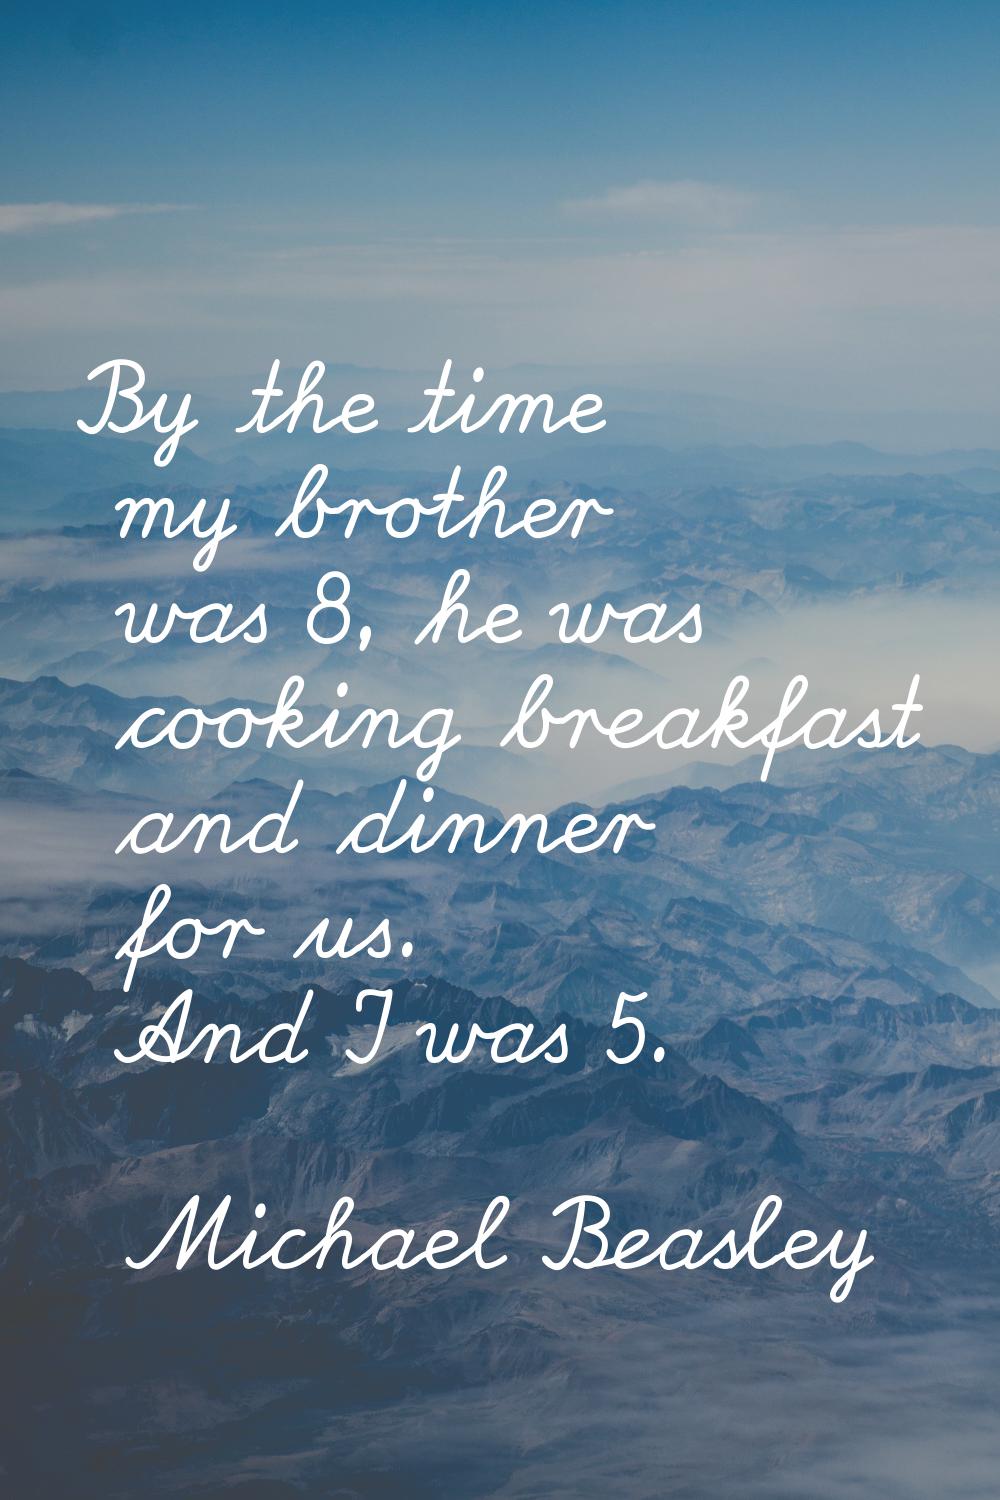 By the time my brother was 8, he was cooking breakfast and dinner for us. And I was 5.